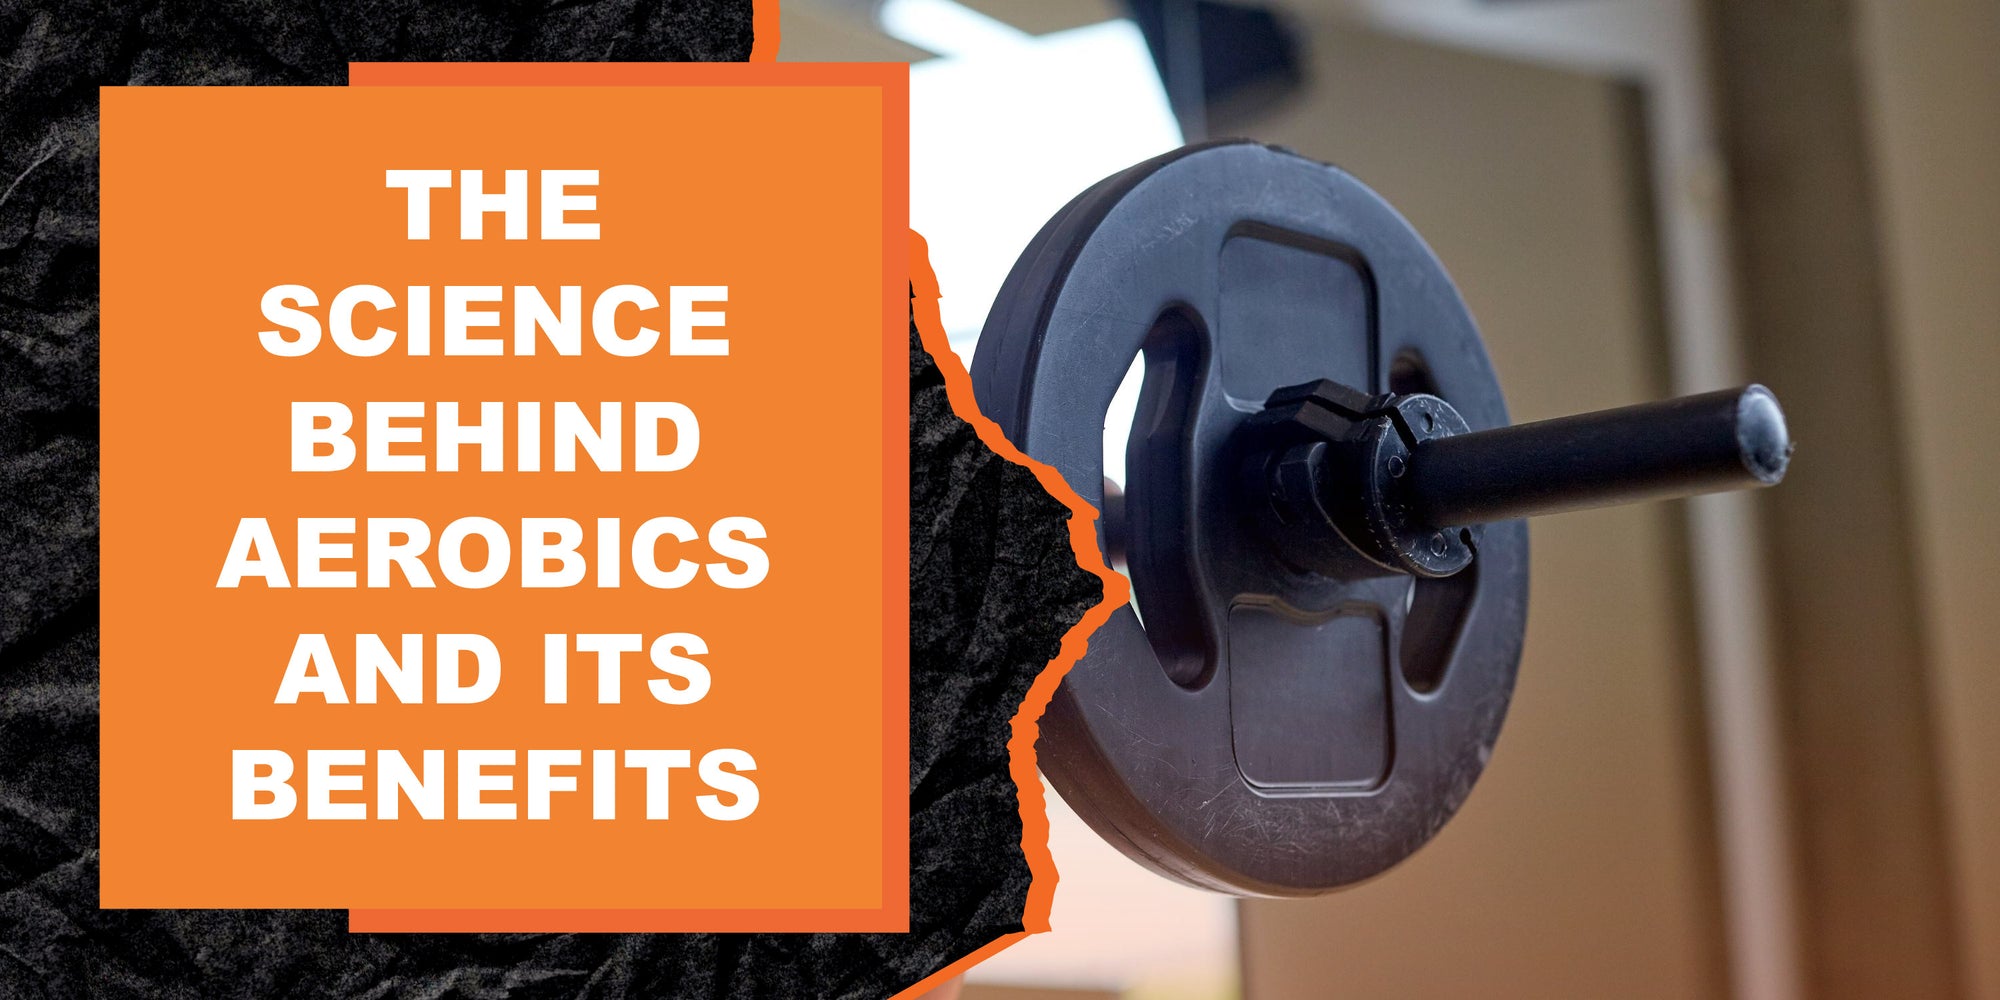 The Science Behind Aerobics and Its Benefits